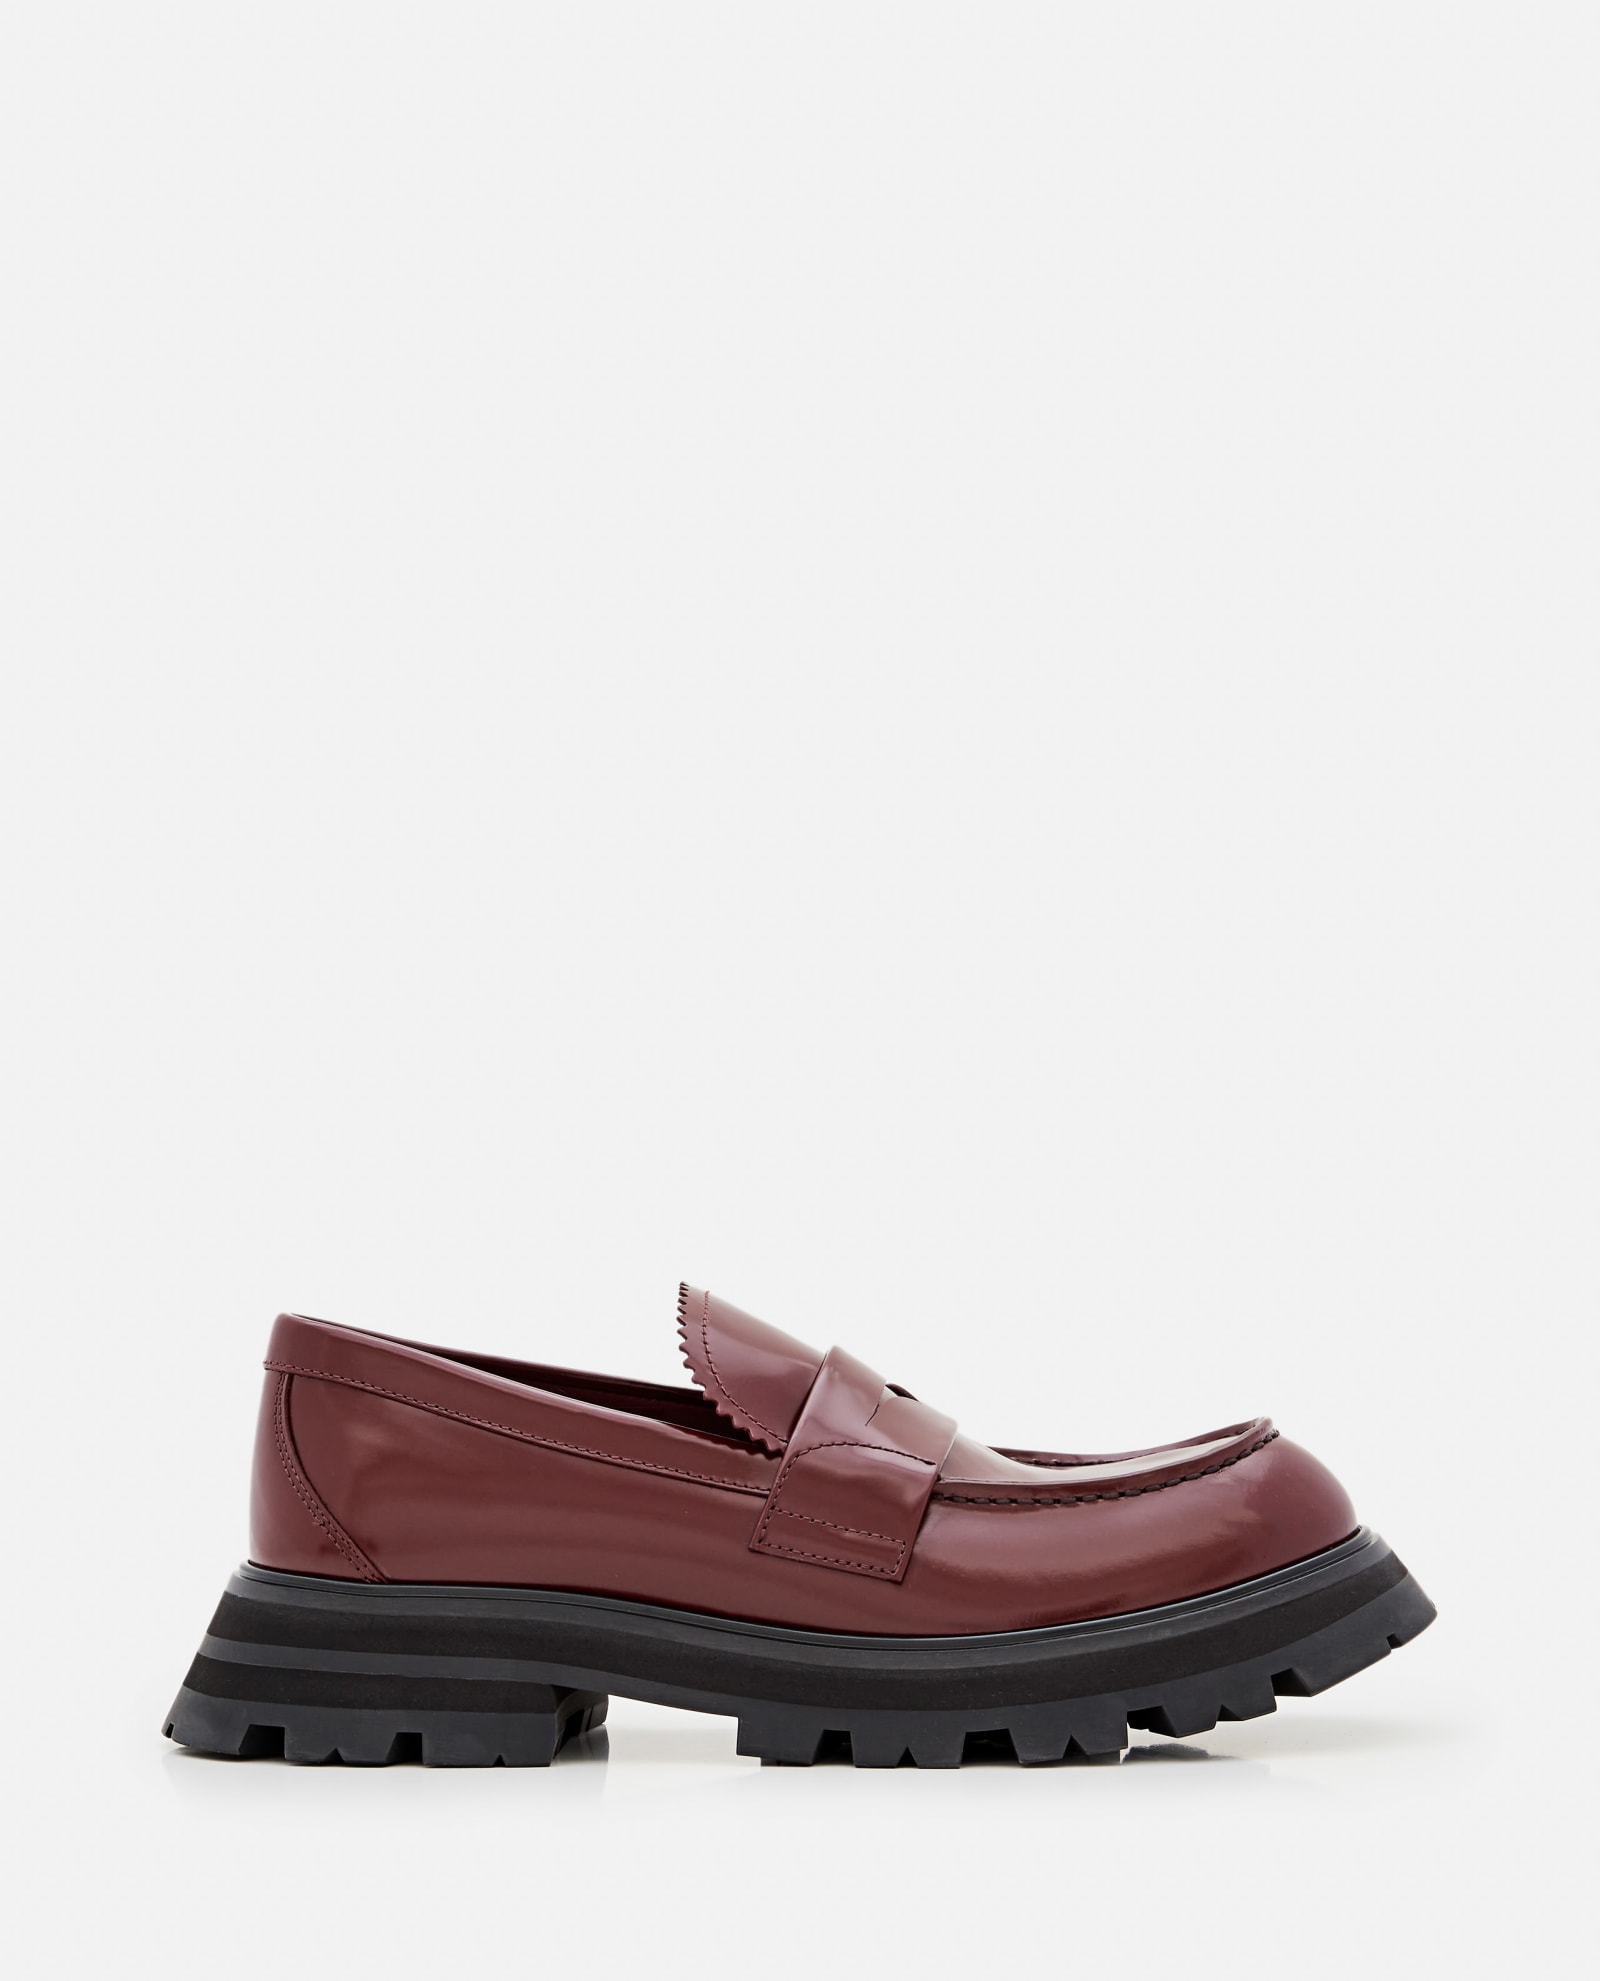 ALEXANDER MCQUEEN LEATHER LOAFERS